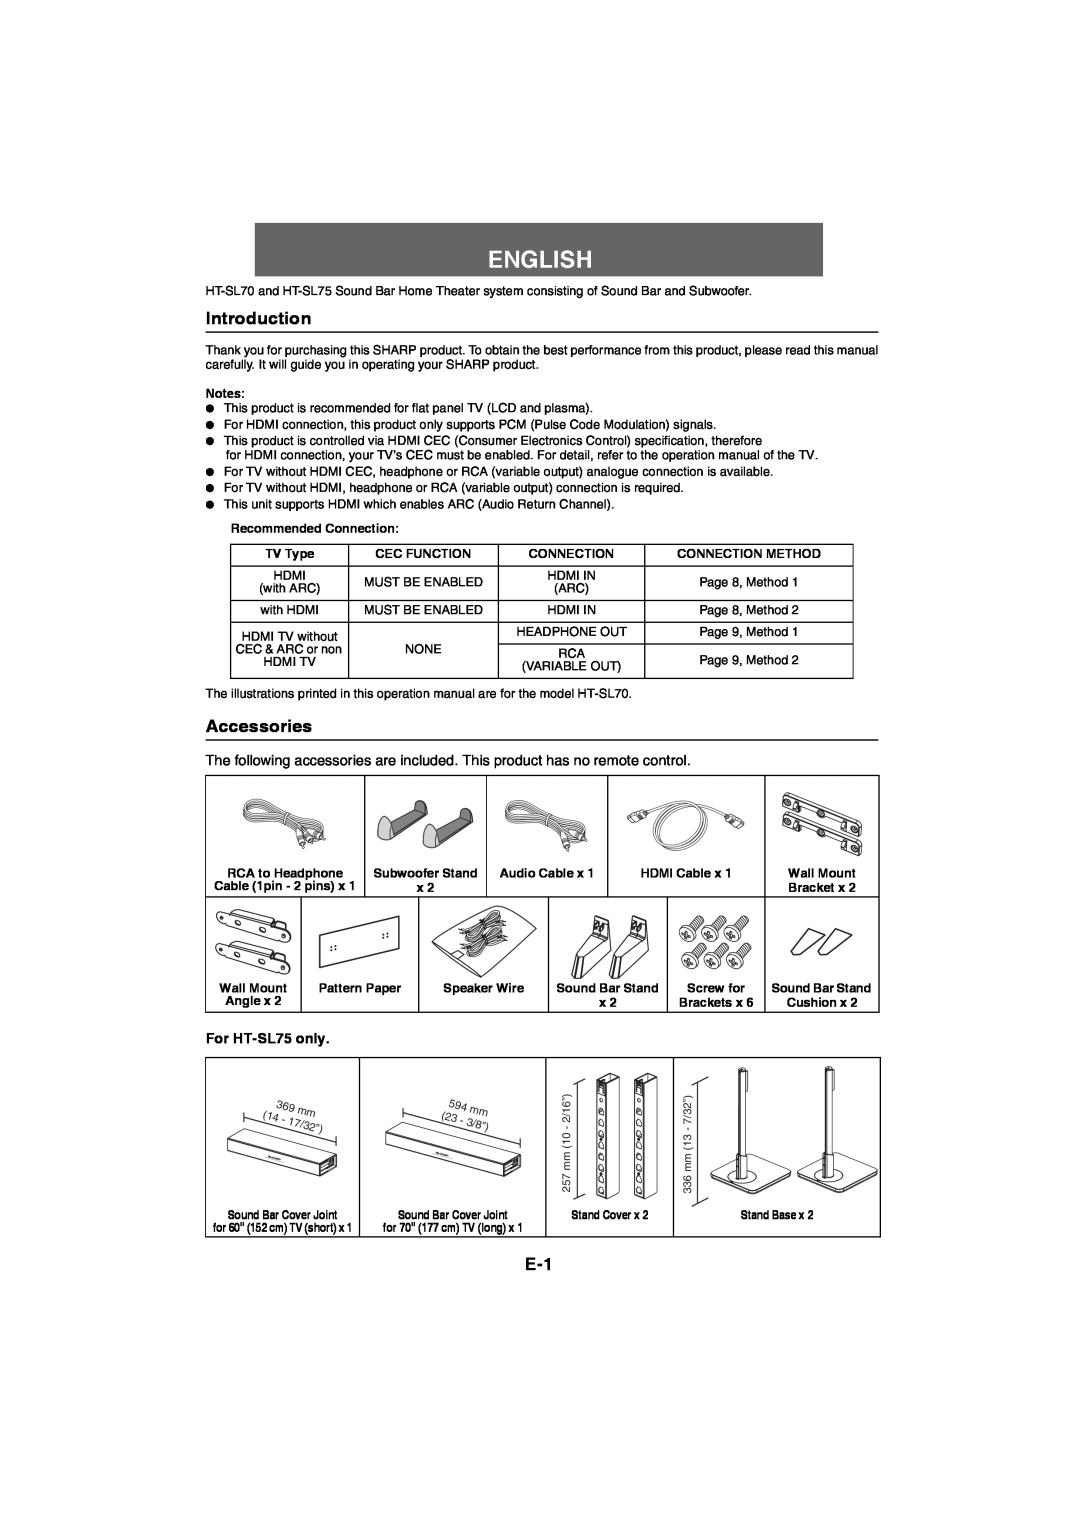 Sharp HT-SL70 operation manual Introduction, Accessories, English, For HT-SL75only 